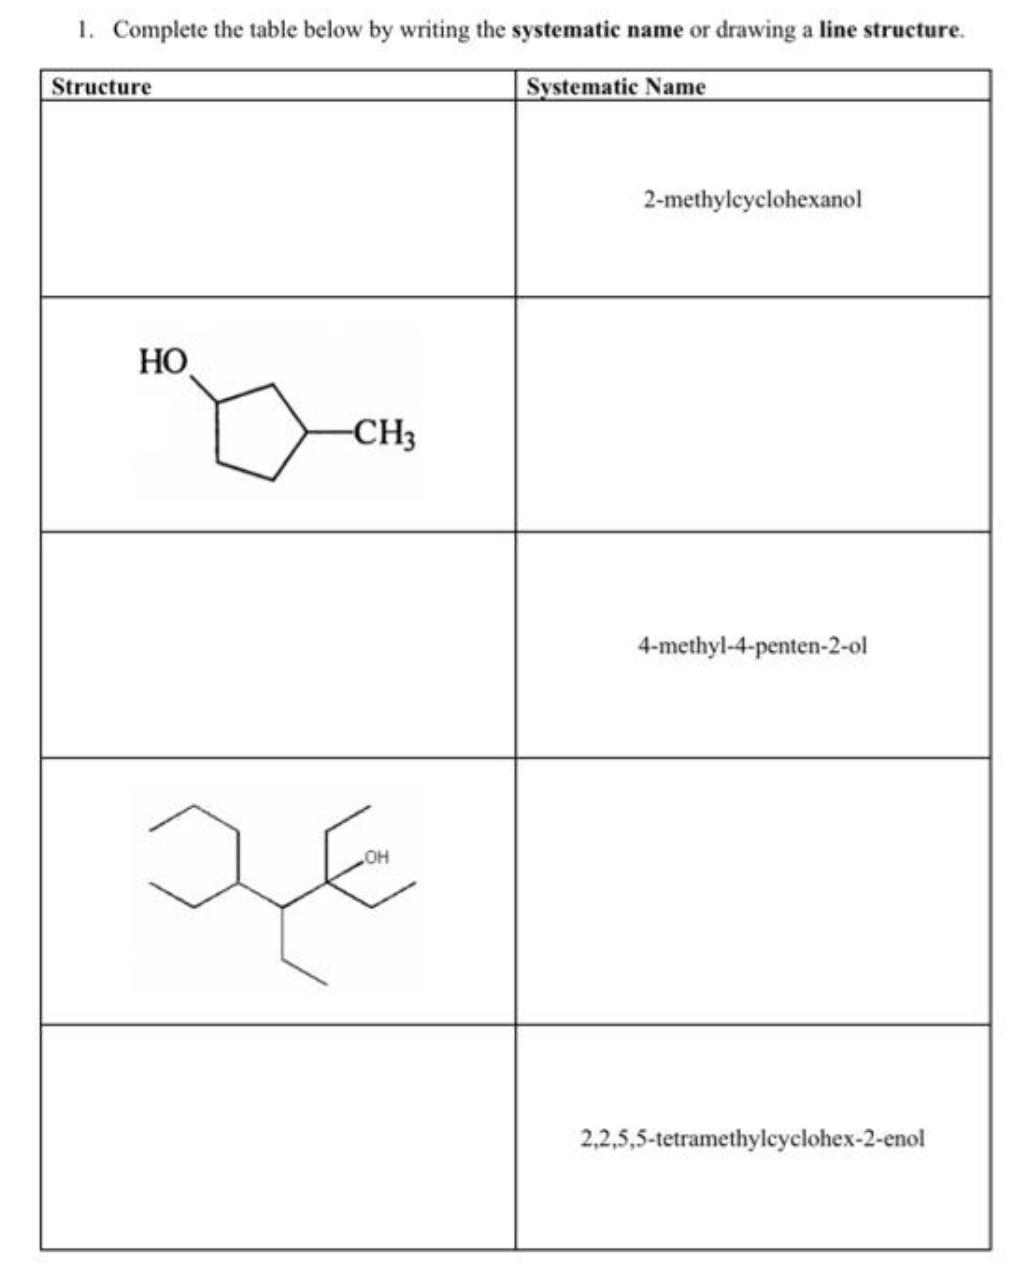 1. Complete the table below by writing the systematic name or drawing a line structure.
Systematic Name
Structure
HO
-CH3
OH
20
2-methylcyclohexanol
4-methyl-4-penten-2-ol
2,2,5,5-tetramethylcyclohex-2-enol